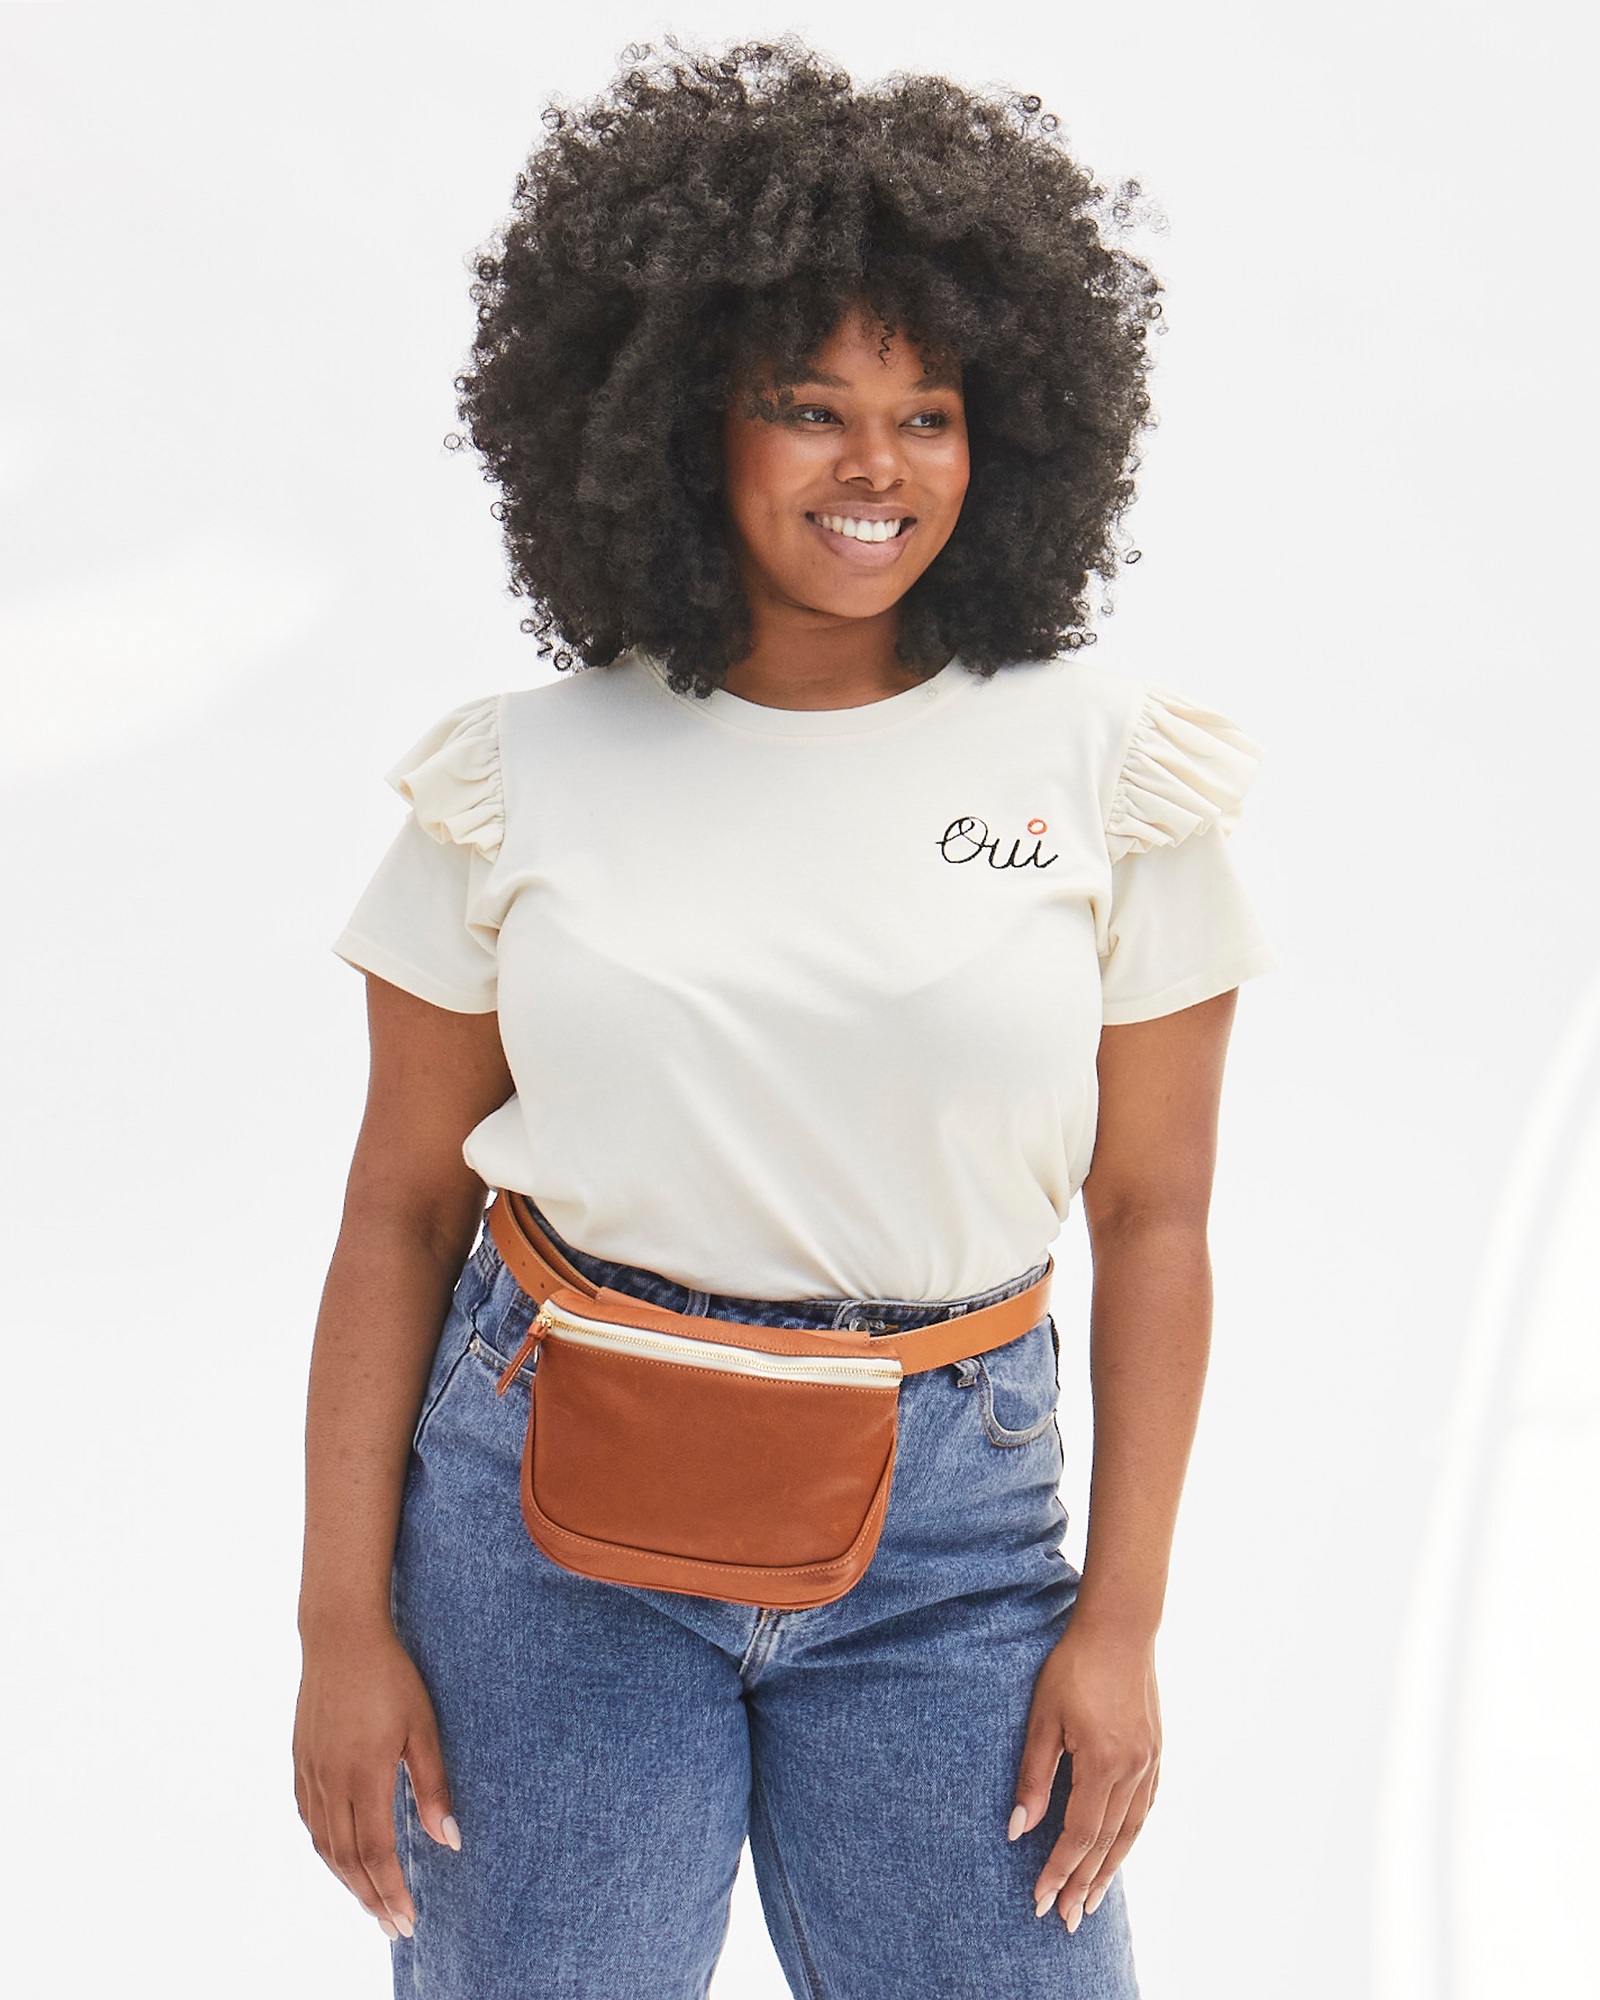 Cuoio Long Fanny Pack Belt on the Tan Neptune Fanny Pack on Candace